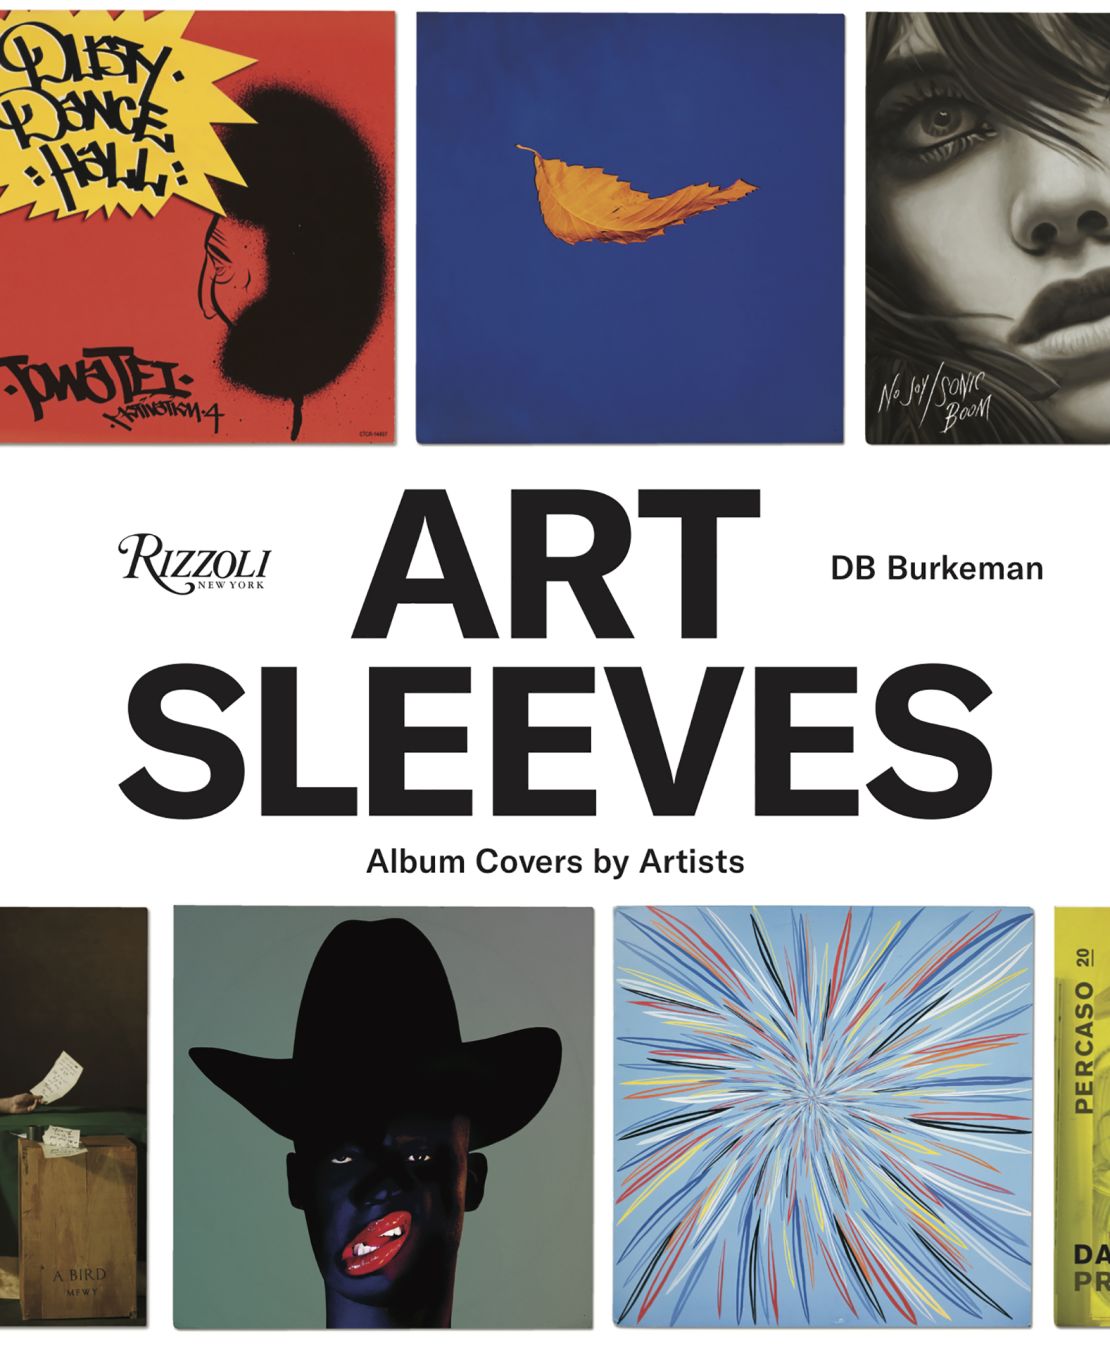 Art Sleeves: Album Covers by Artists by DB Burkman is published by Rizzoli priced at £40.00.